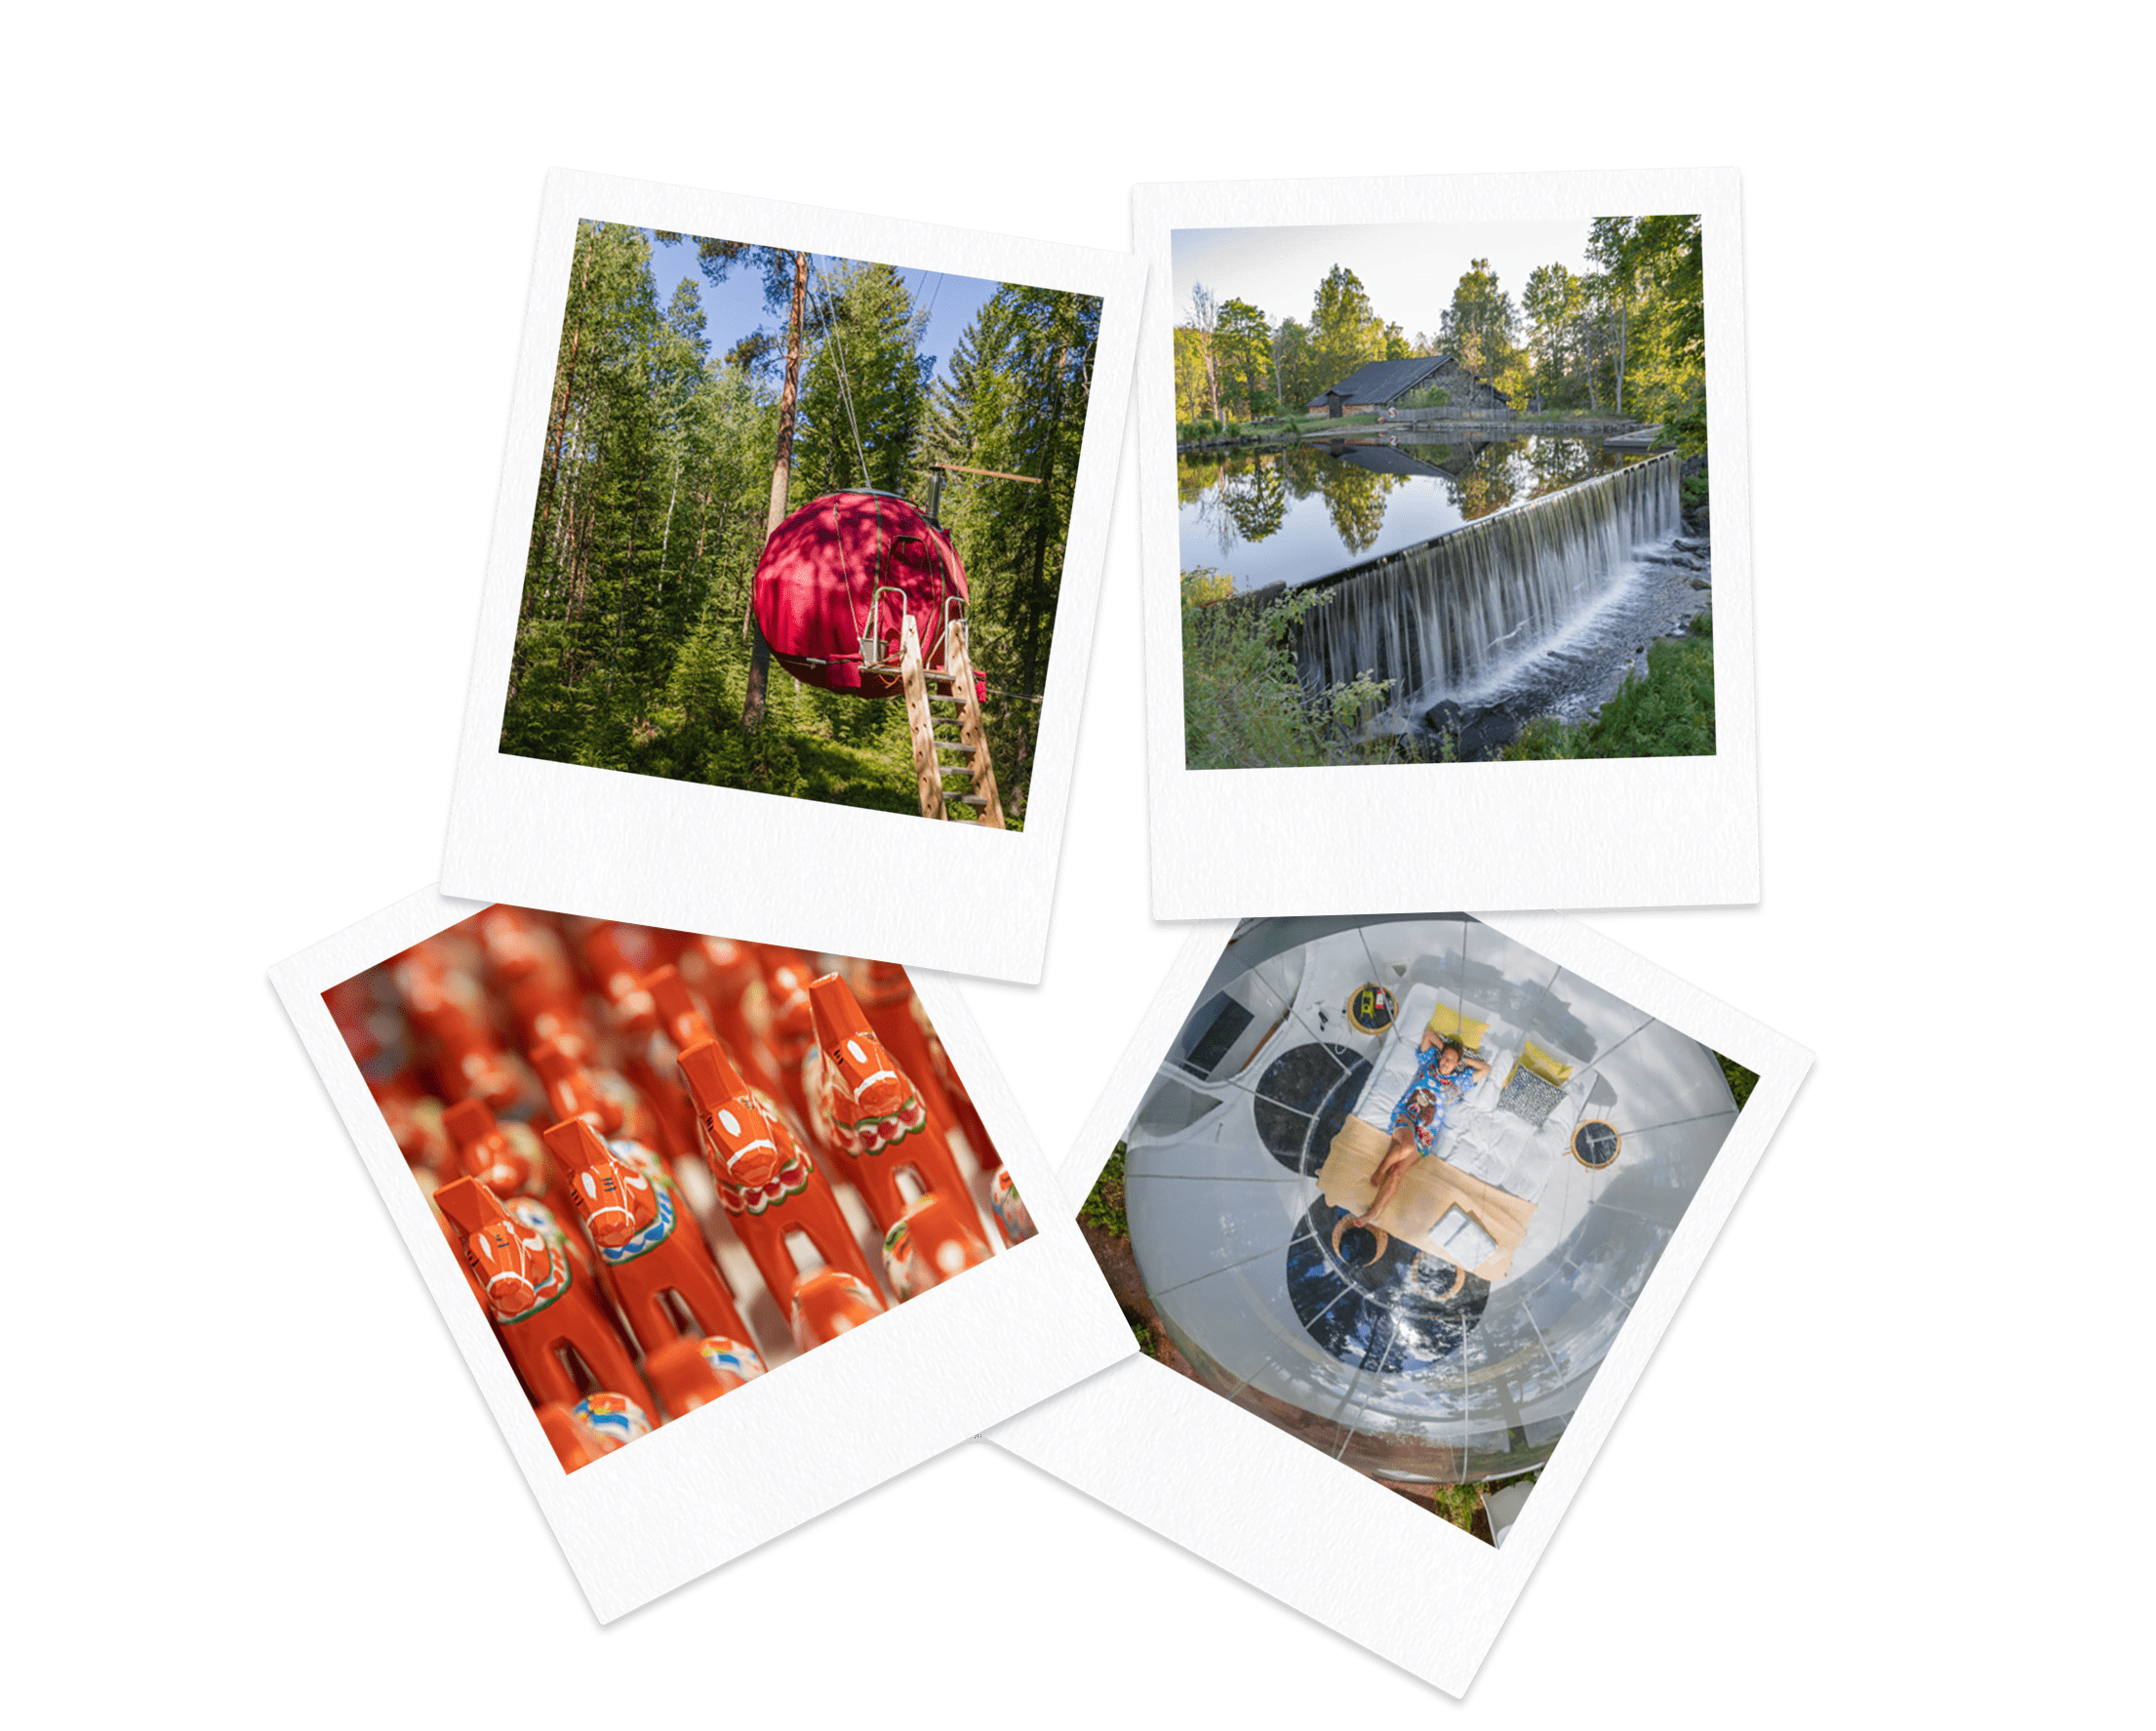 places to visit in dalarna county